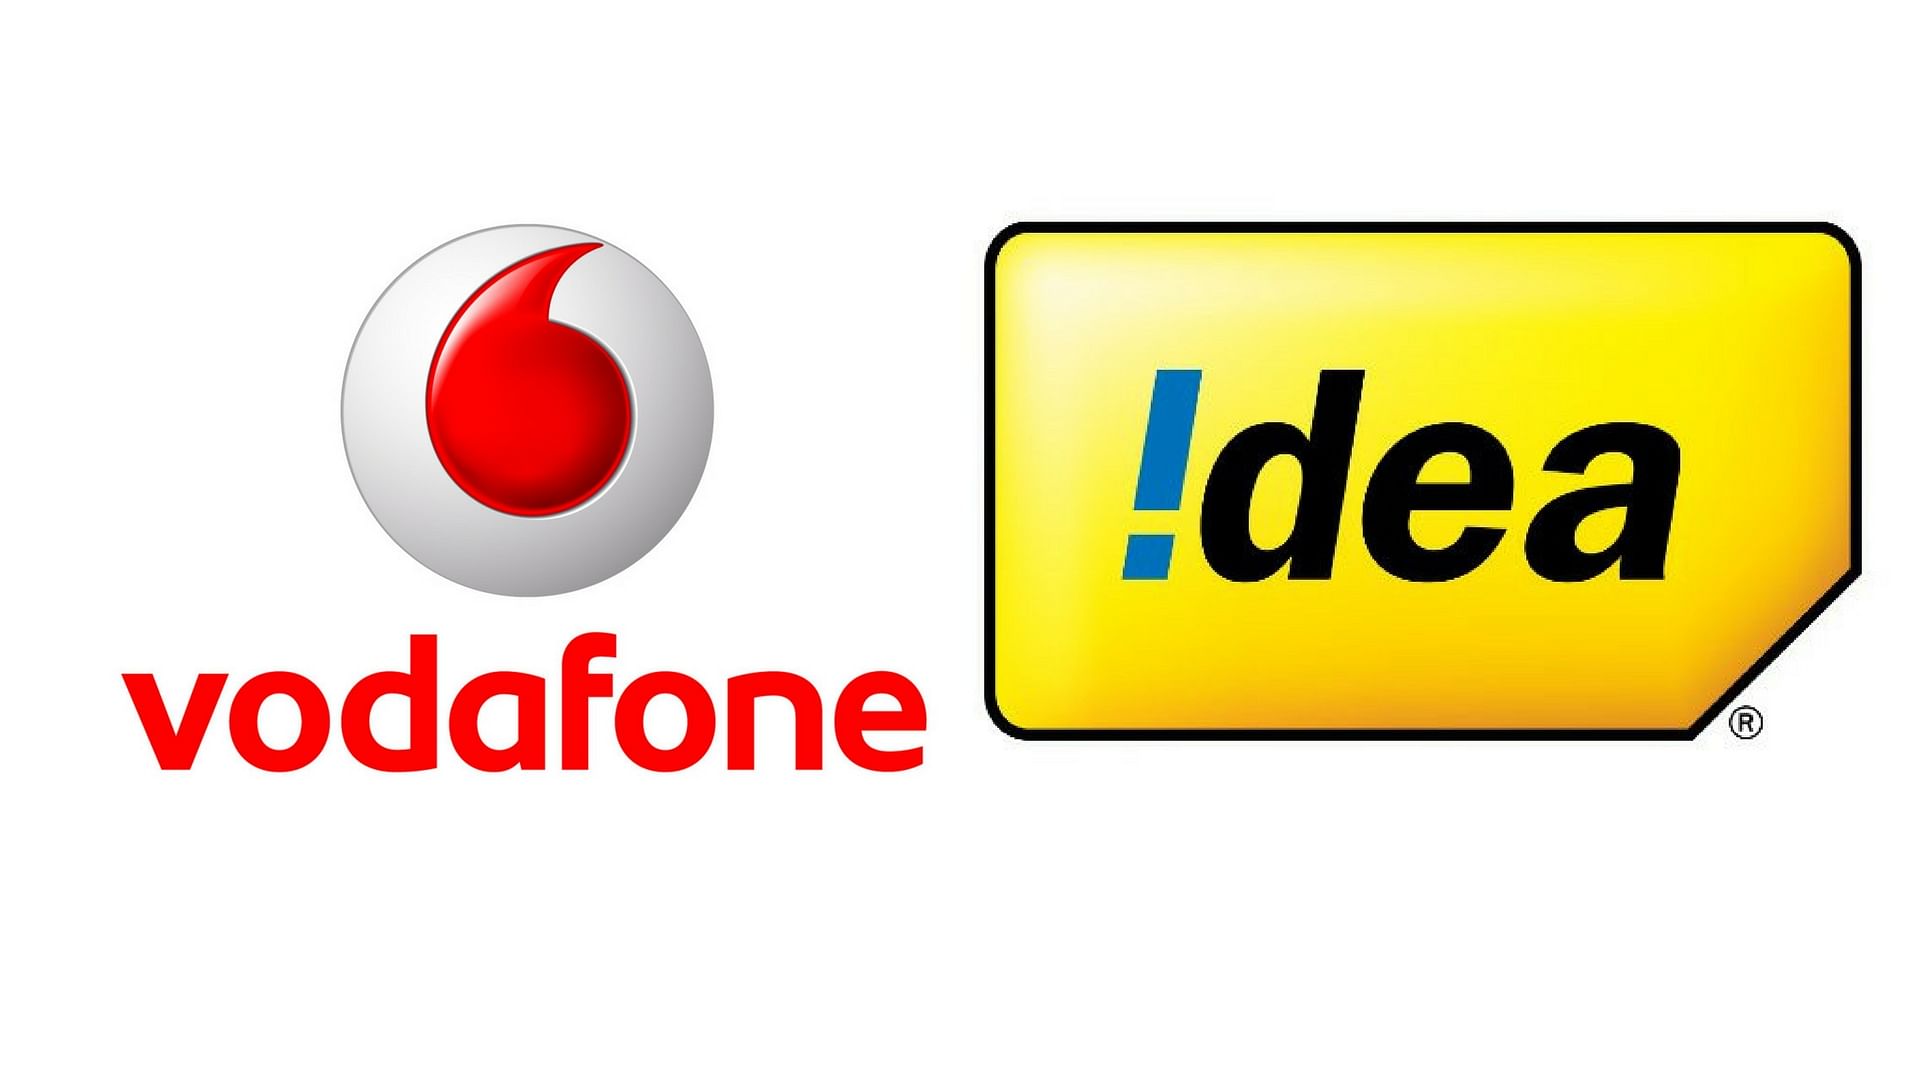 Vodafone will hold 45.1 percent of the merged entity, while Idea will hold 26 percent. 